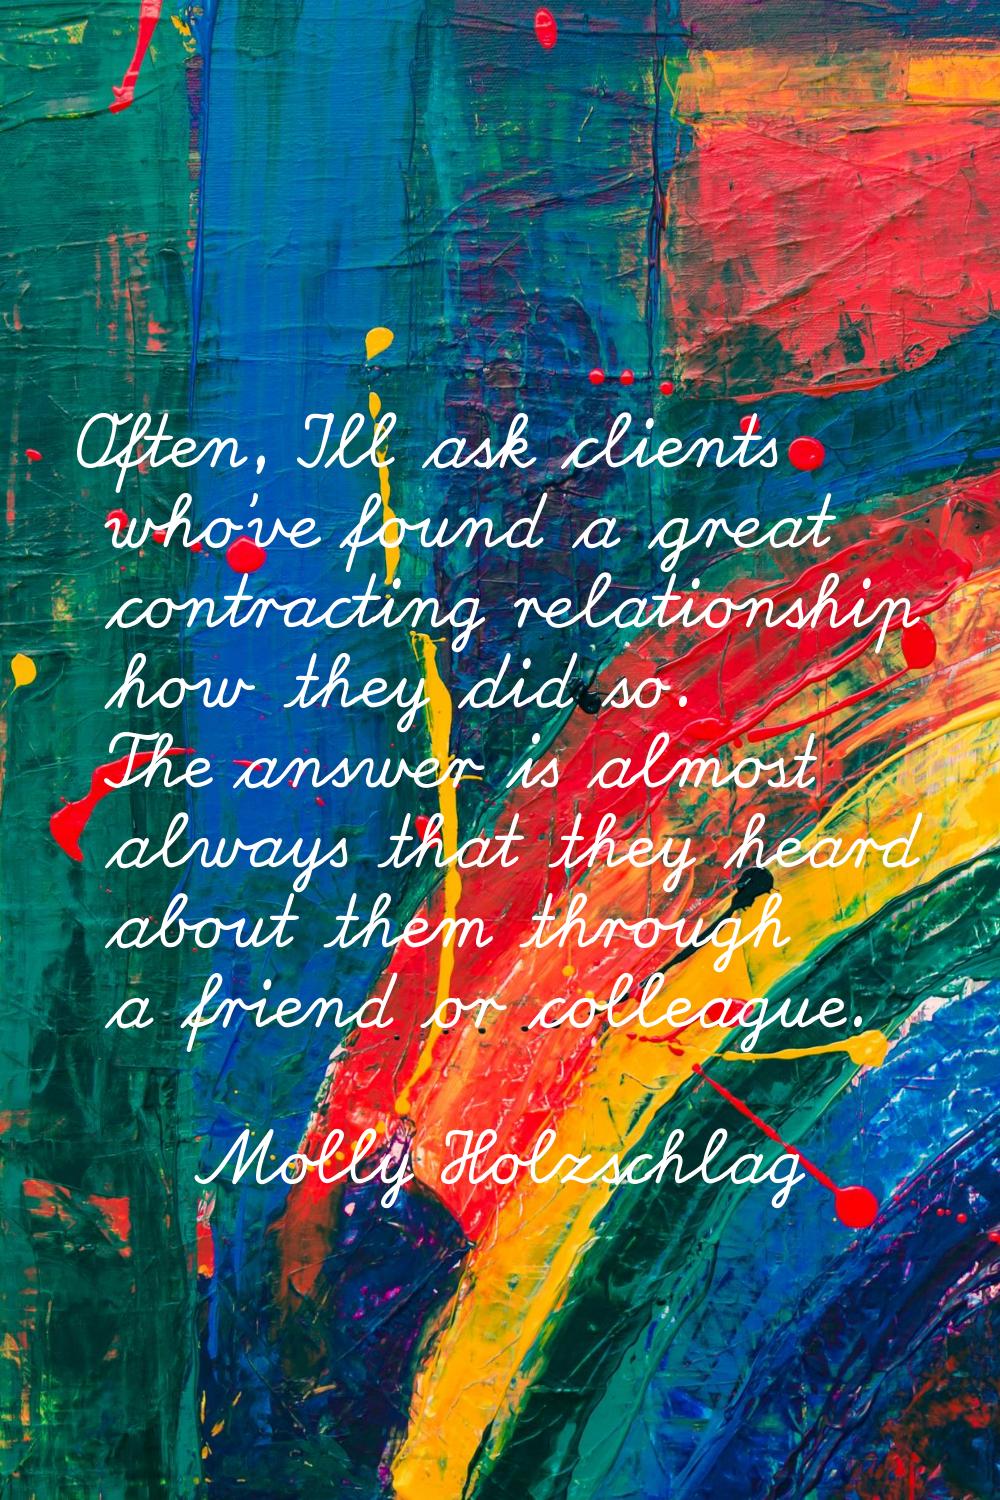 Often, I'll ask clients who've found a great contracting relationship how they did so. The answer i